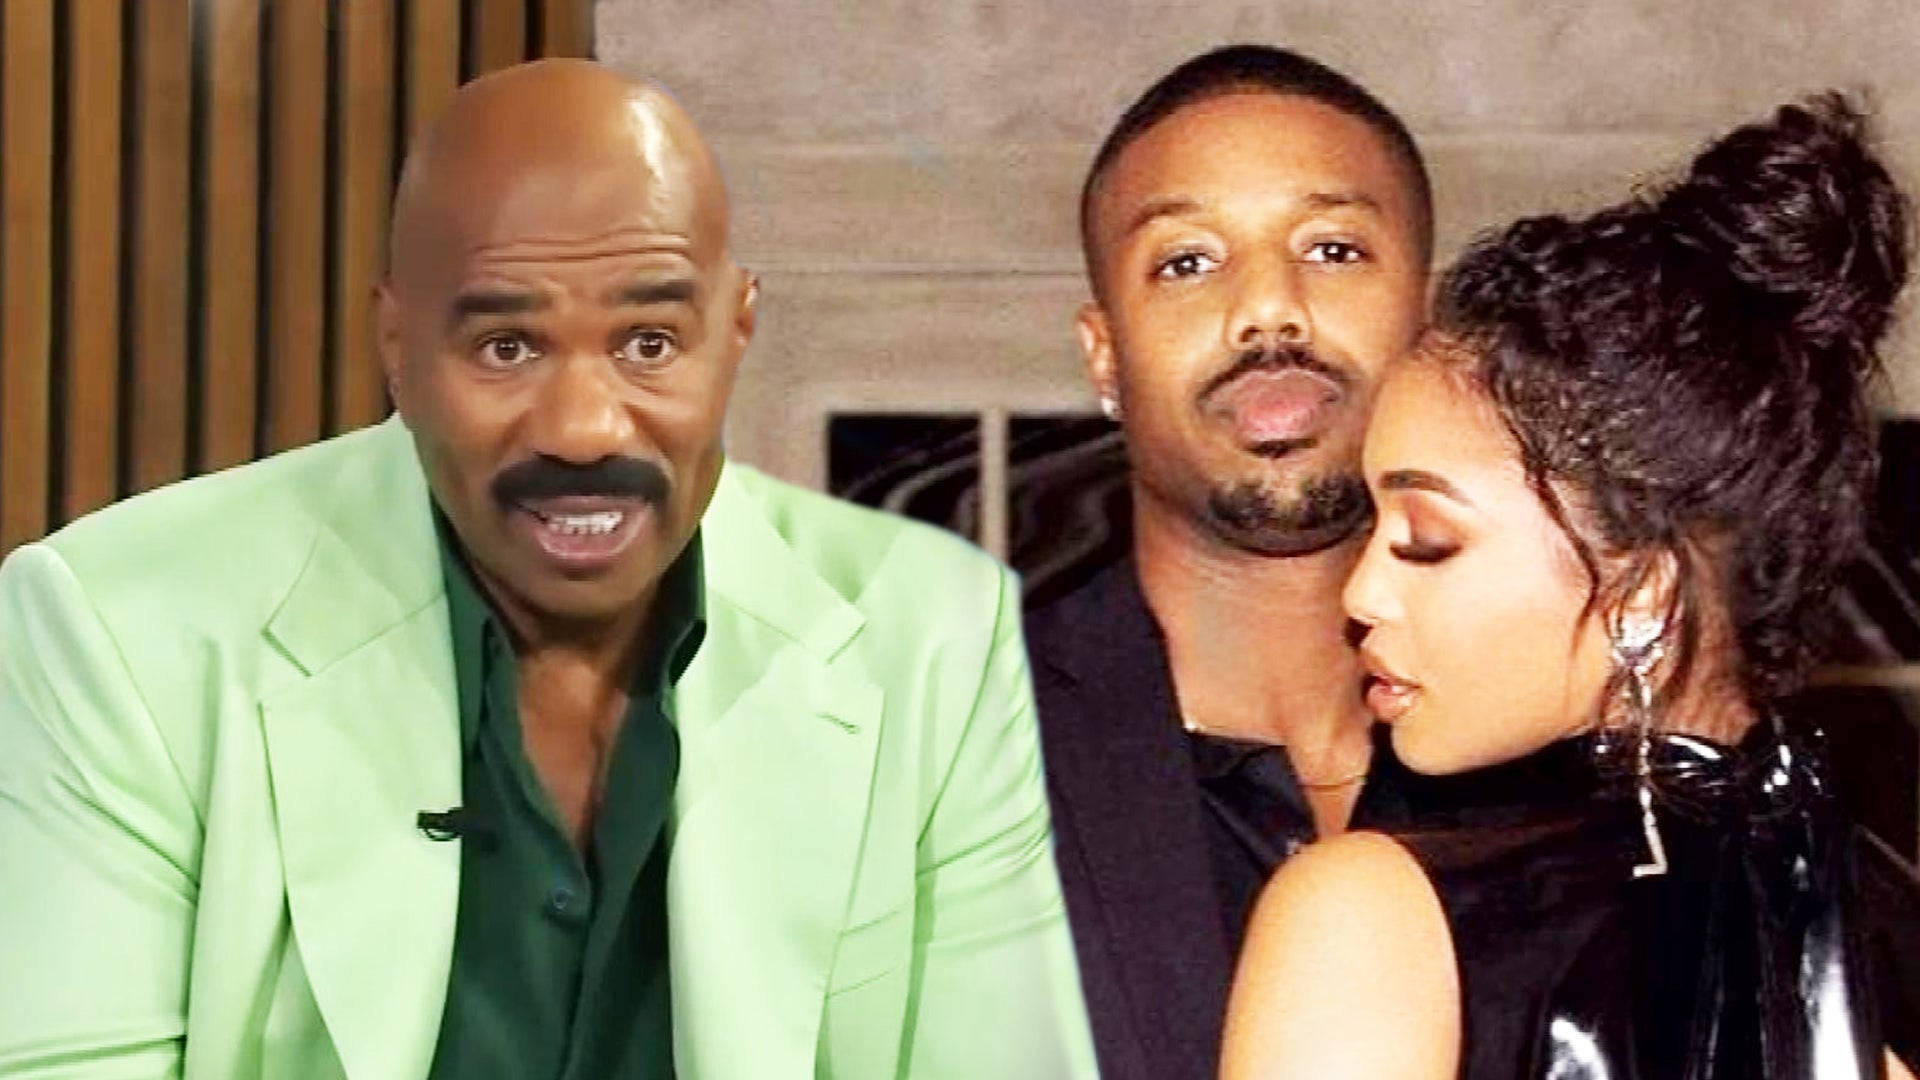 Renowned Television Host, Steve Harvey, Sharing A Moment With Hollywood Actor Michael B. Jordan Background